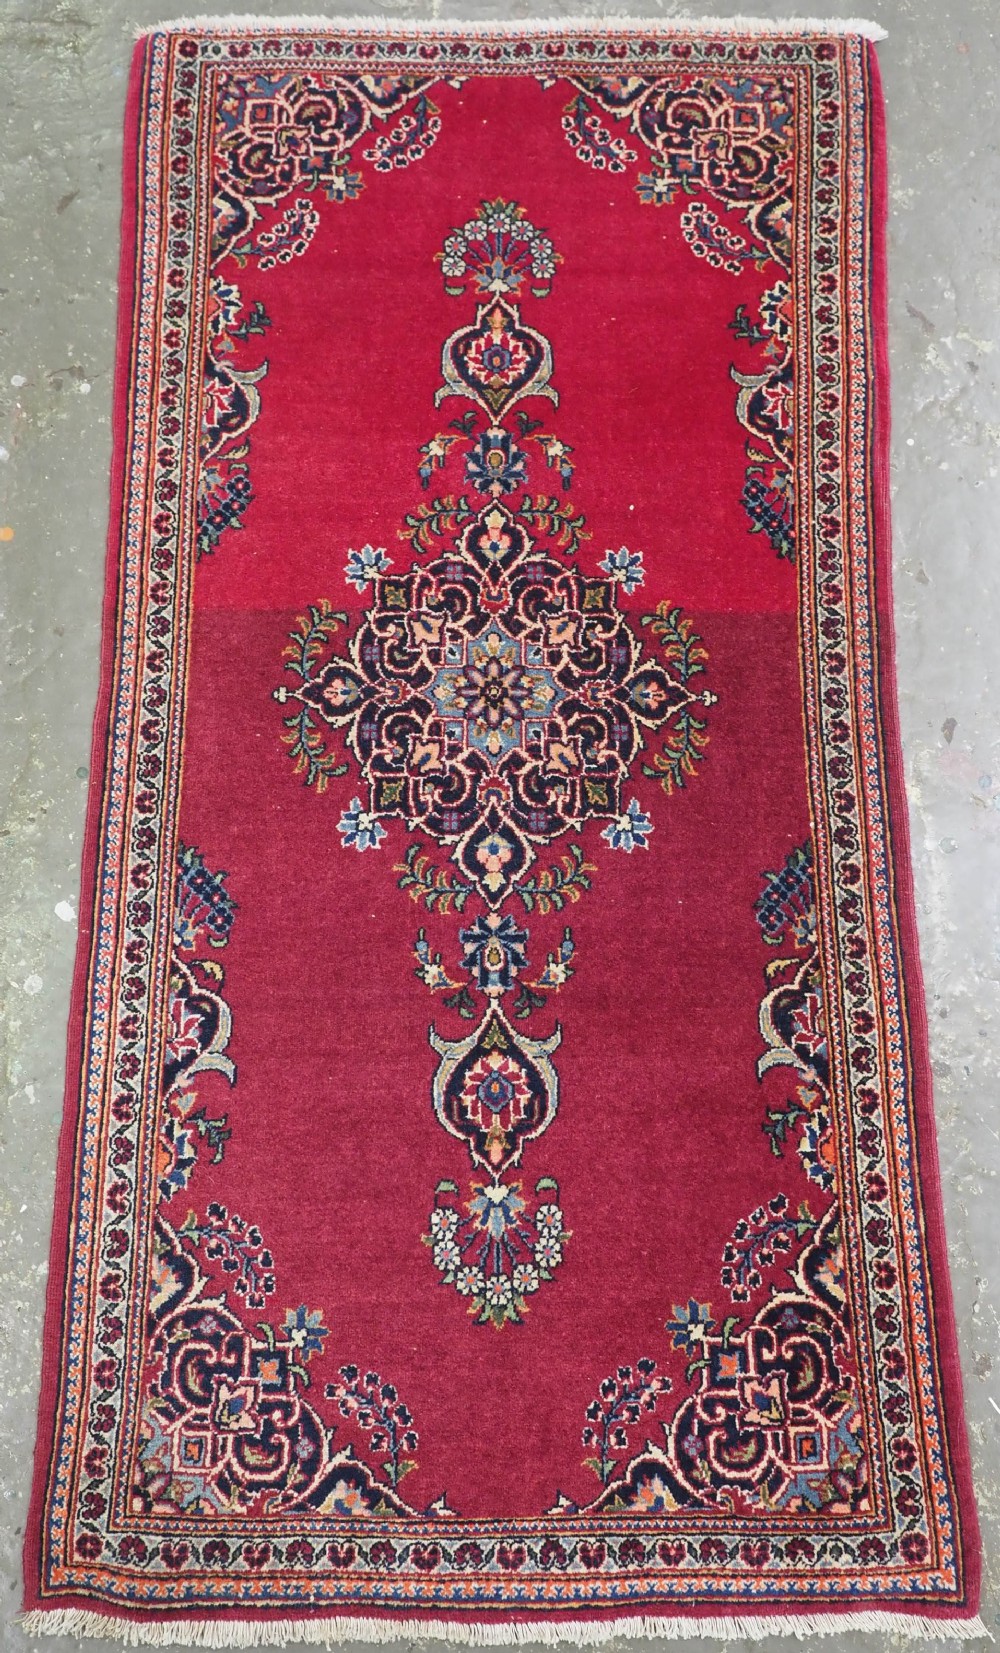 antique kashan rug of small size royal burgundy colour outstanding condition circa 1900